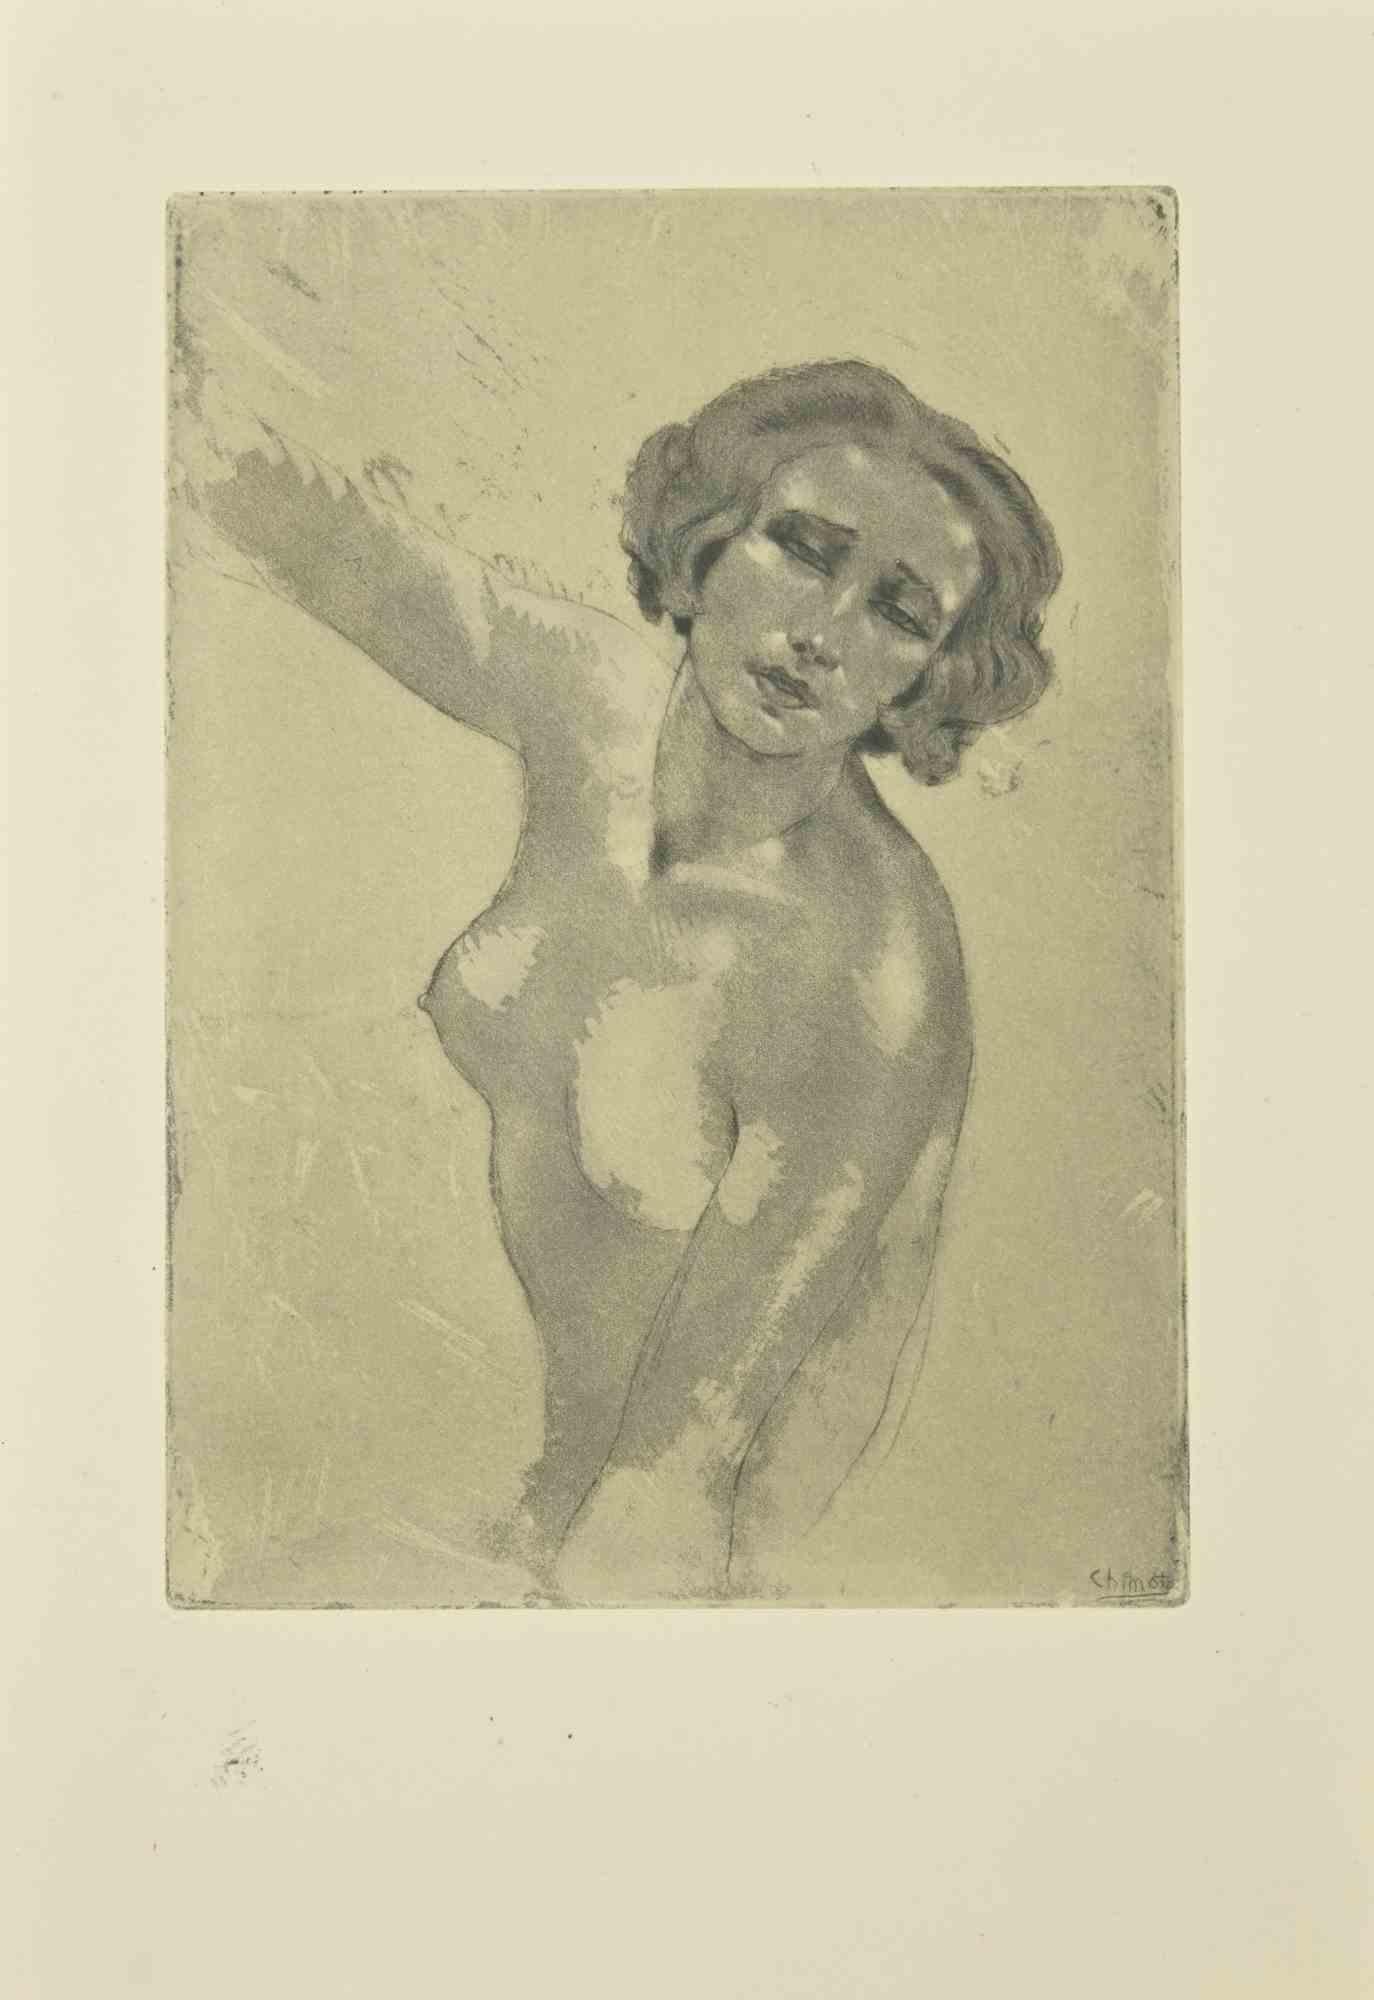 Nude is an etching realized by Edouard Chimot in the 1930s.

Signed on the plate by the artist on the lower right corner.

Good conditions.

Édouard Chimot (26 November 1880 – 7 June 1959) was a French artist, illustrator and editor whose career